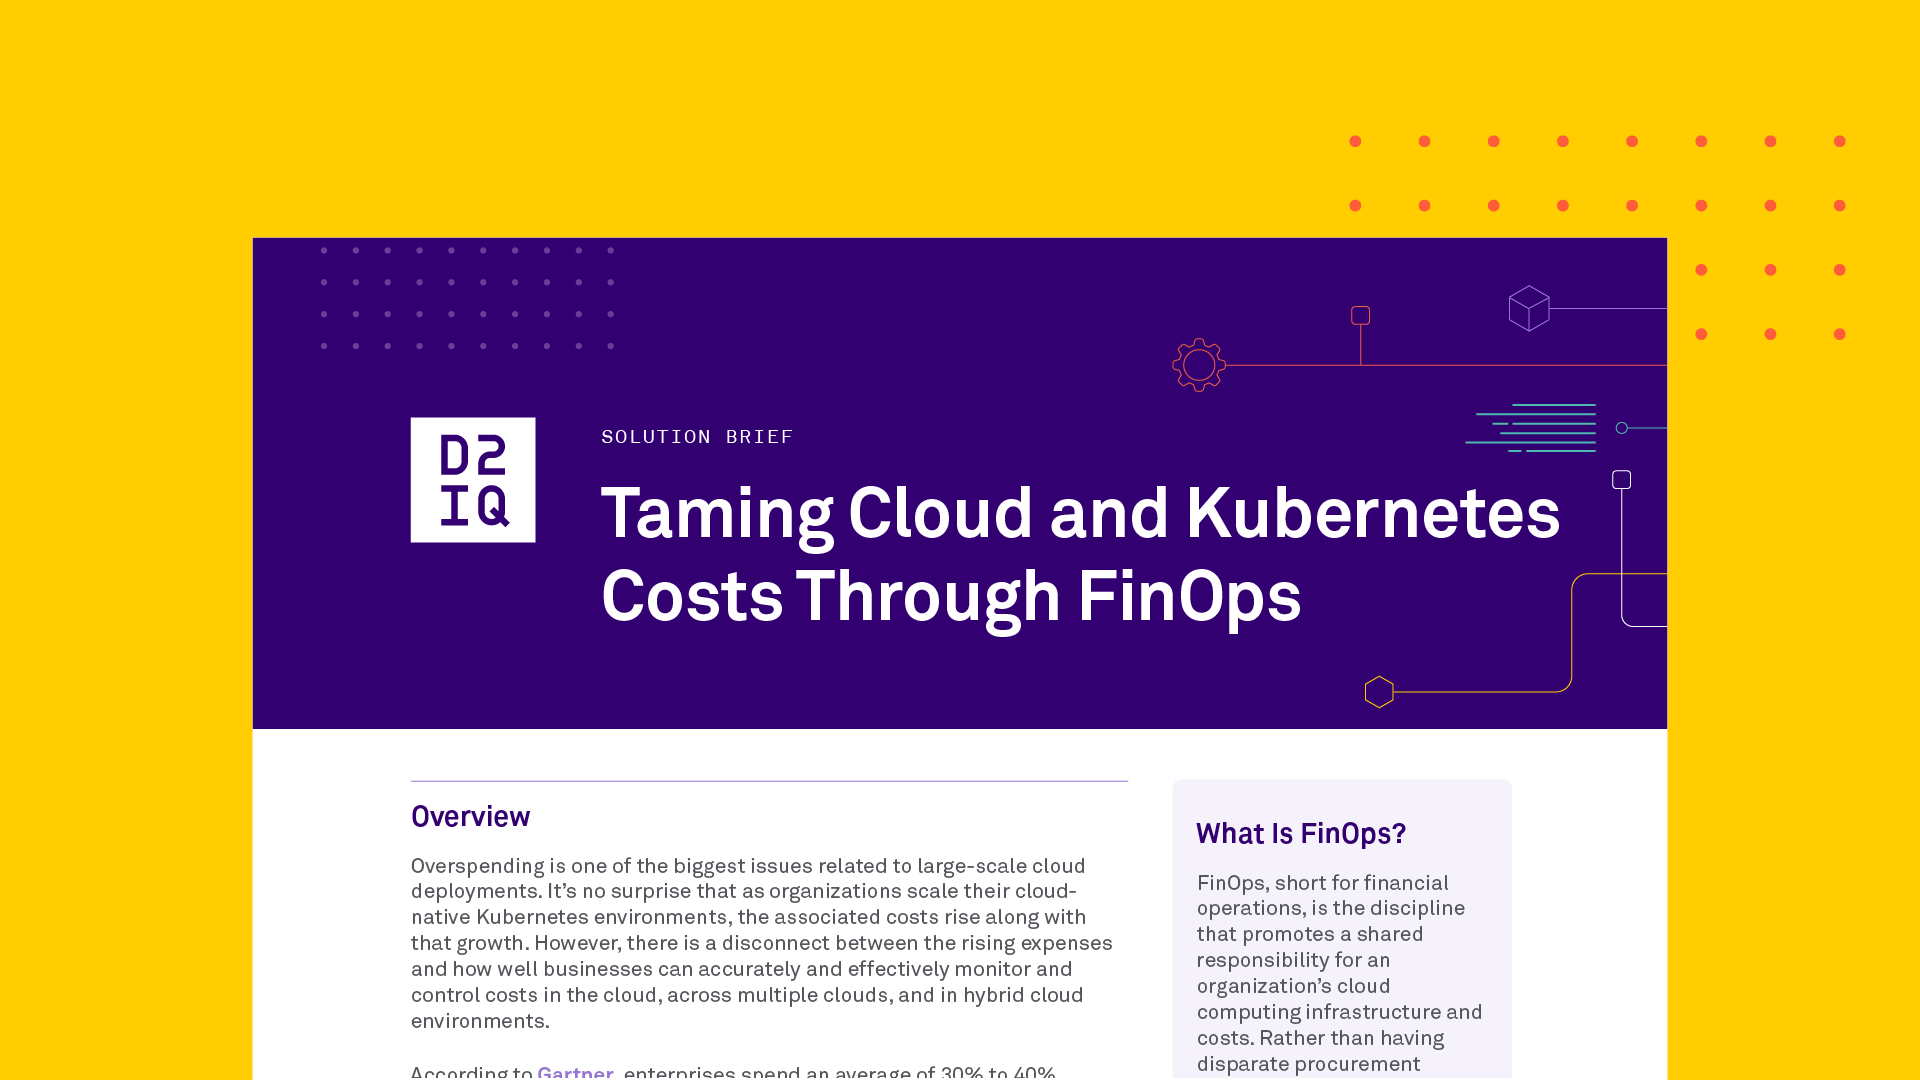 Taming Cloud and Kubernetes Costs Through FinOps